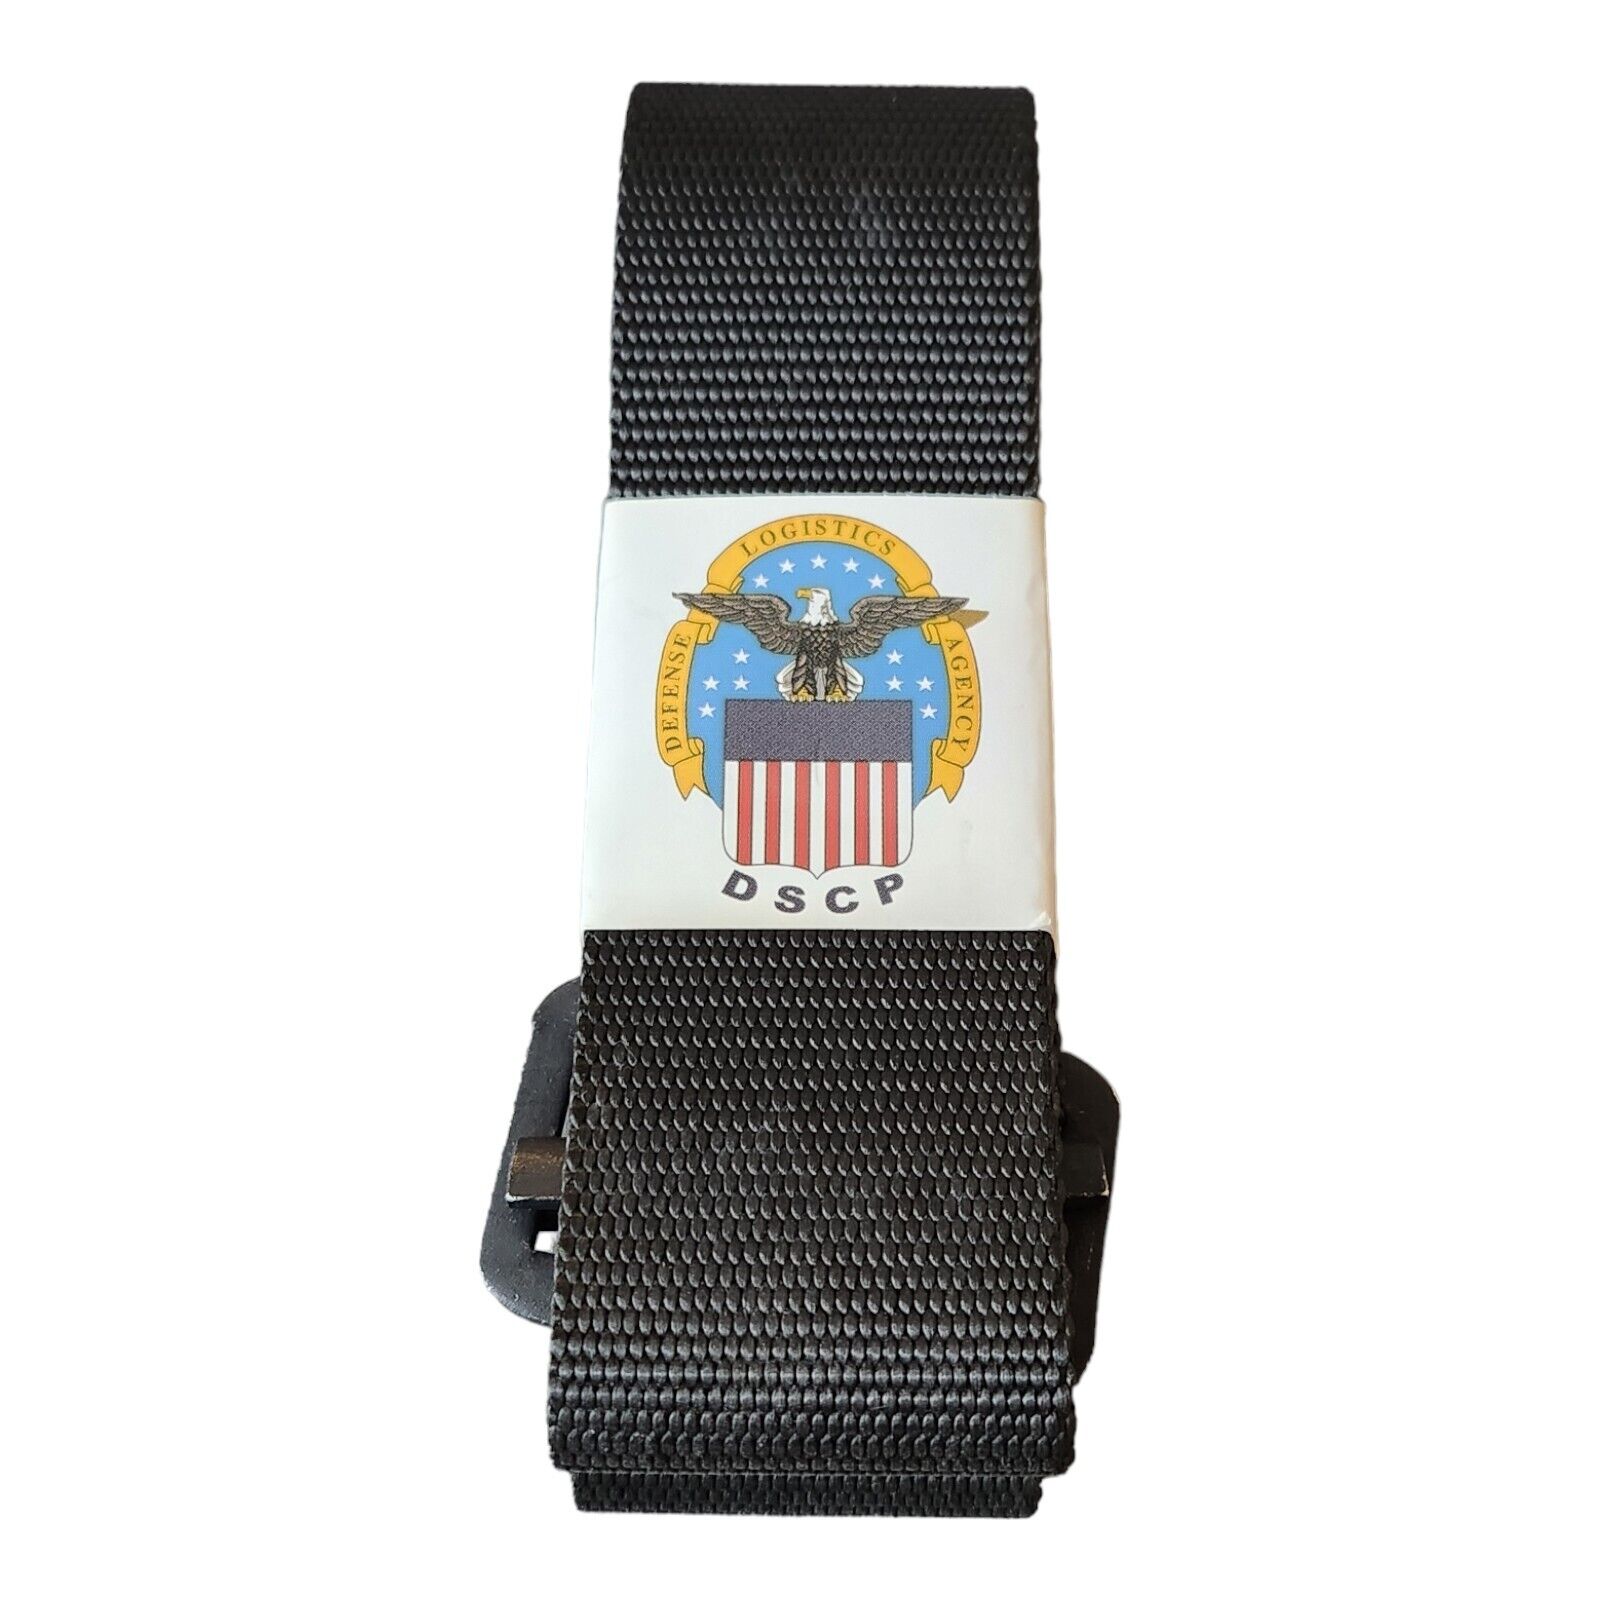 DSCP - US Military Issue -Riggers Belt - Black - Size 46